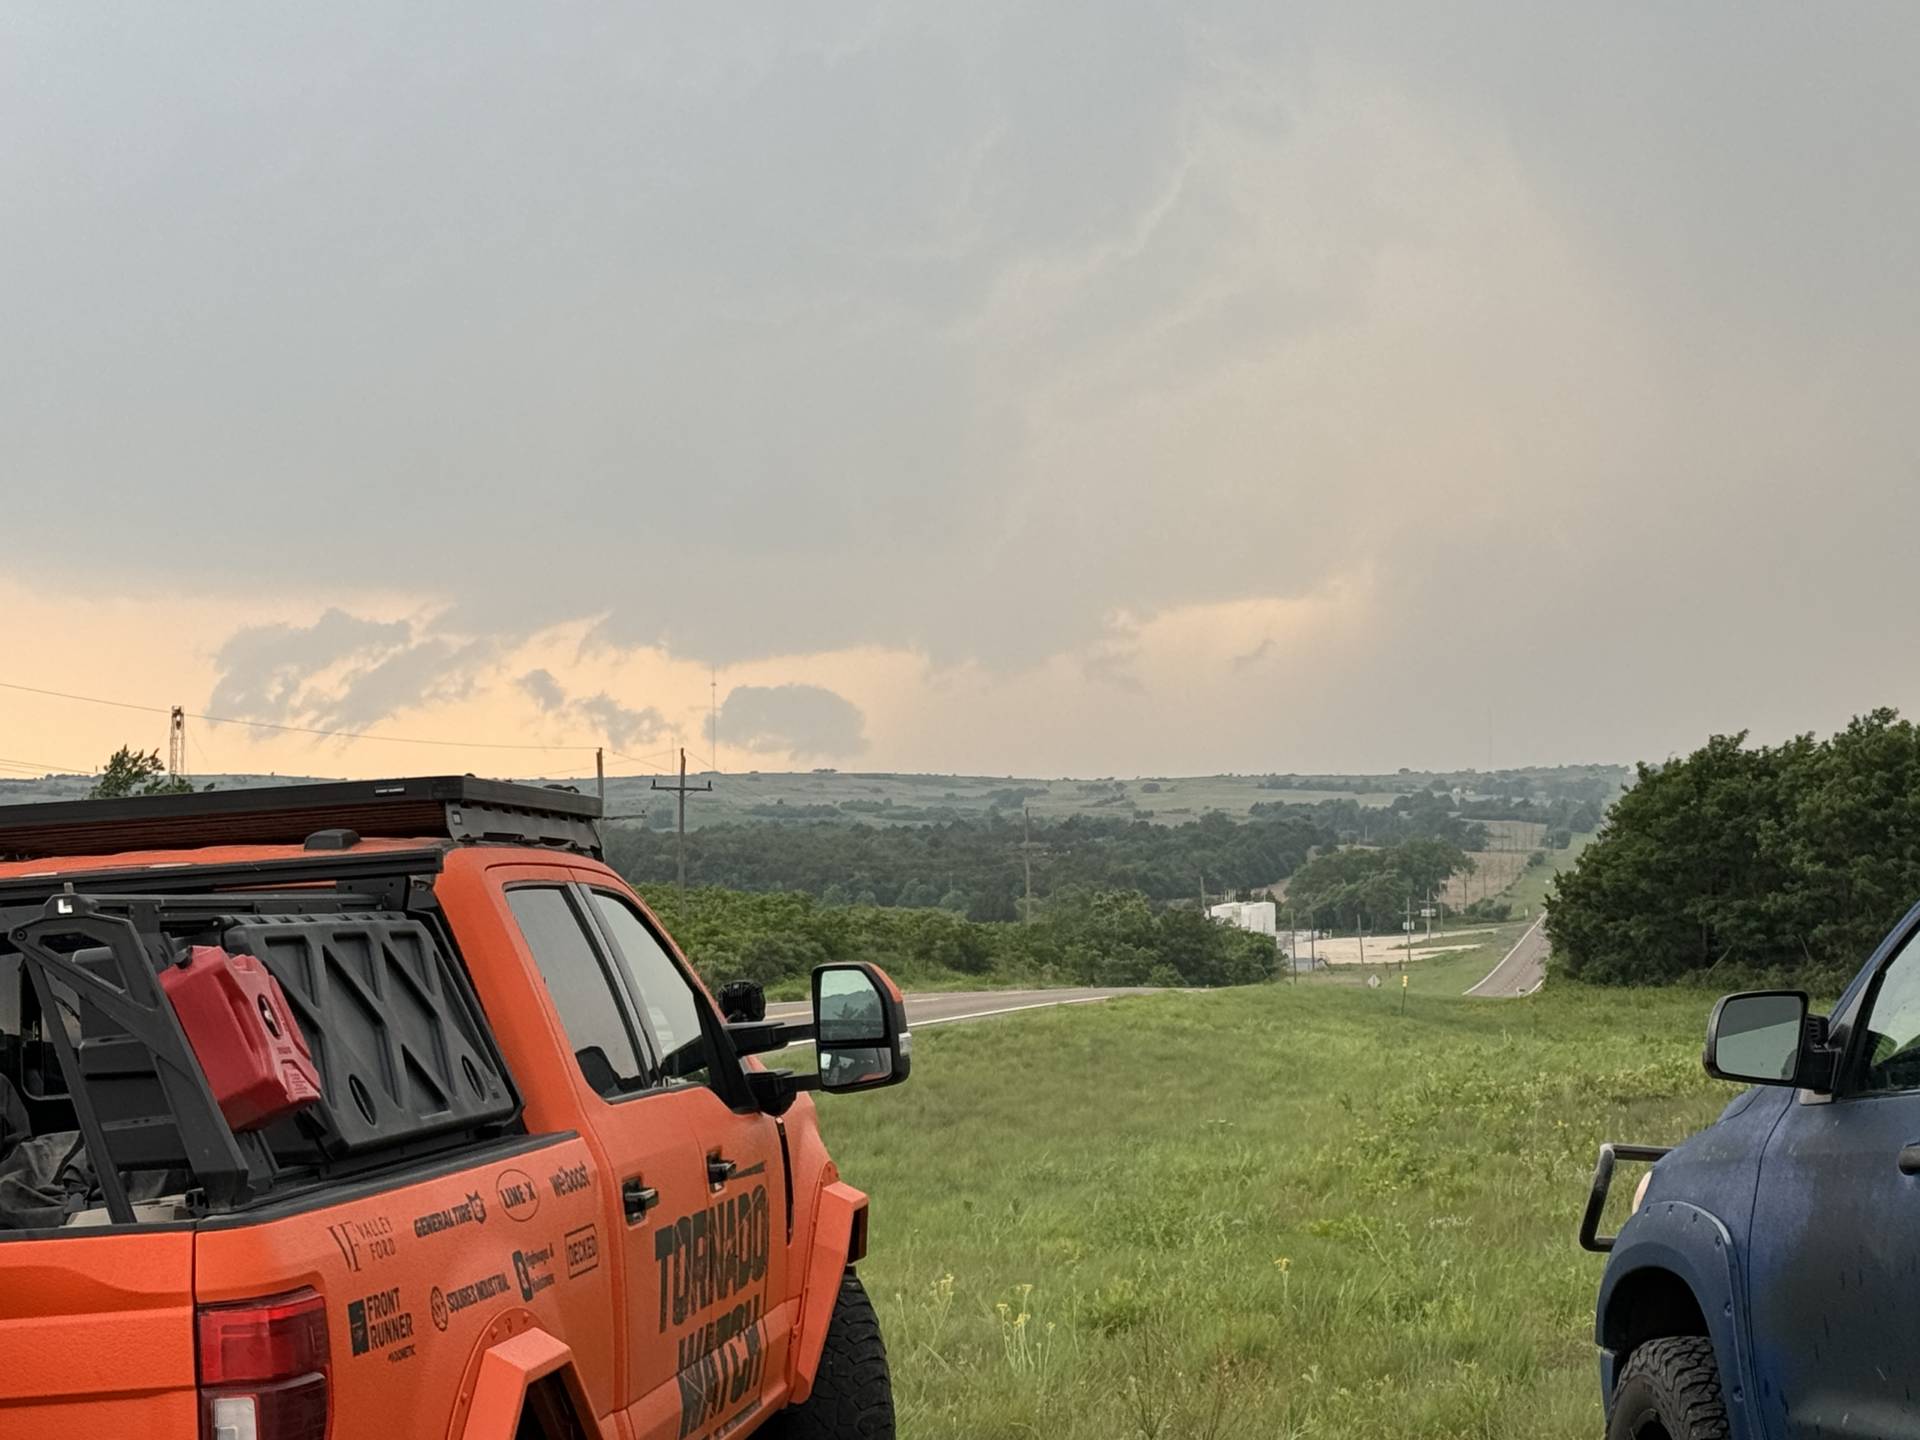 Severe warned storm hooking up and starting to lower near Arnett, OK 05:23 PM @NWSNorman @NWStulsa #okwx